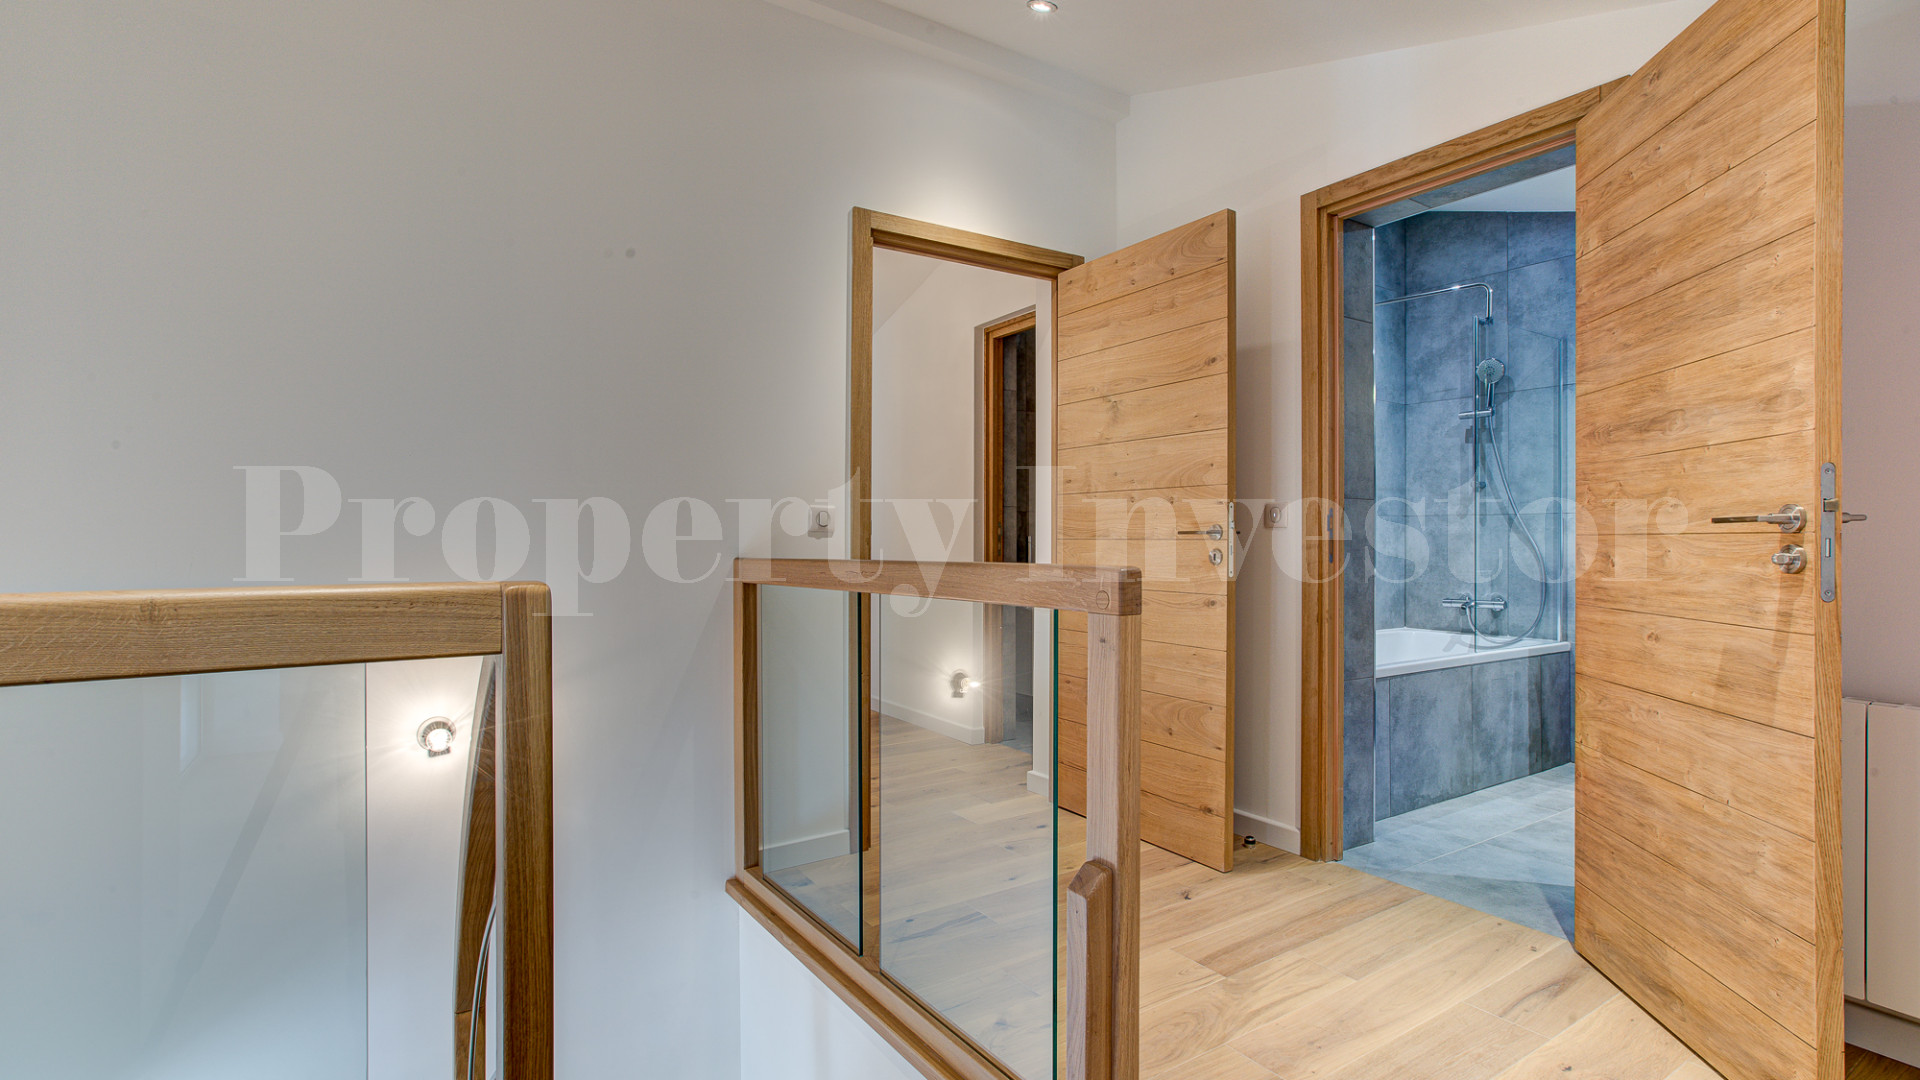 Spacious 4 Bedroom Luxury Mountain & Lake View Penthouse for Sale in Chamonix-Mont-Blanc, France